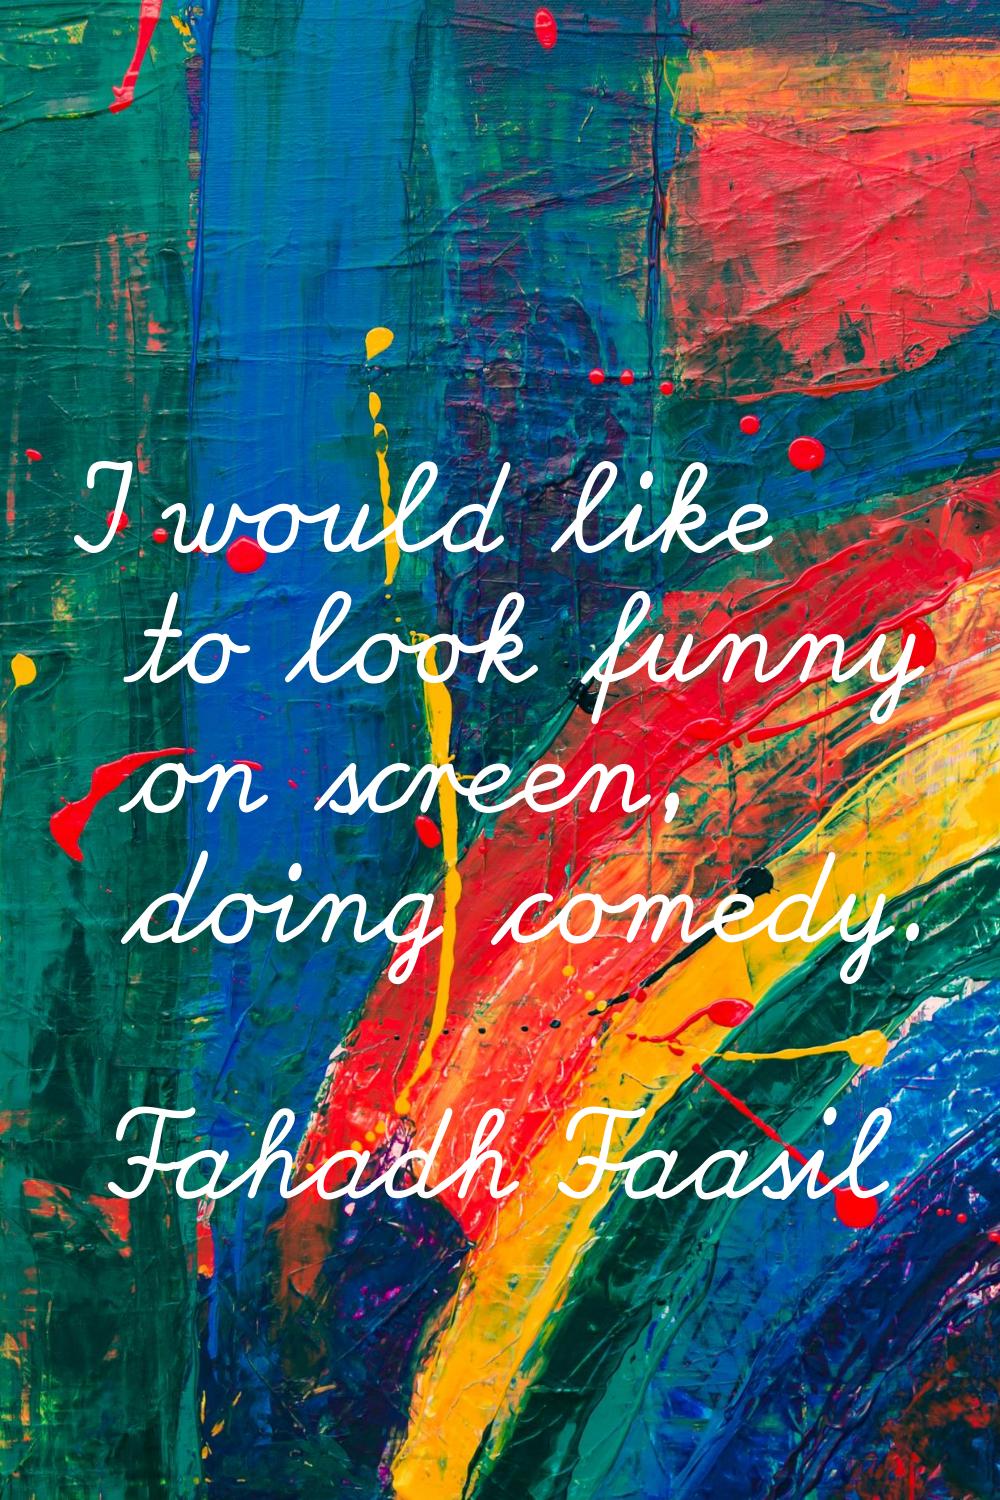 I would like to look funny on screen, doing comedy.